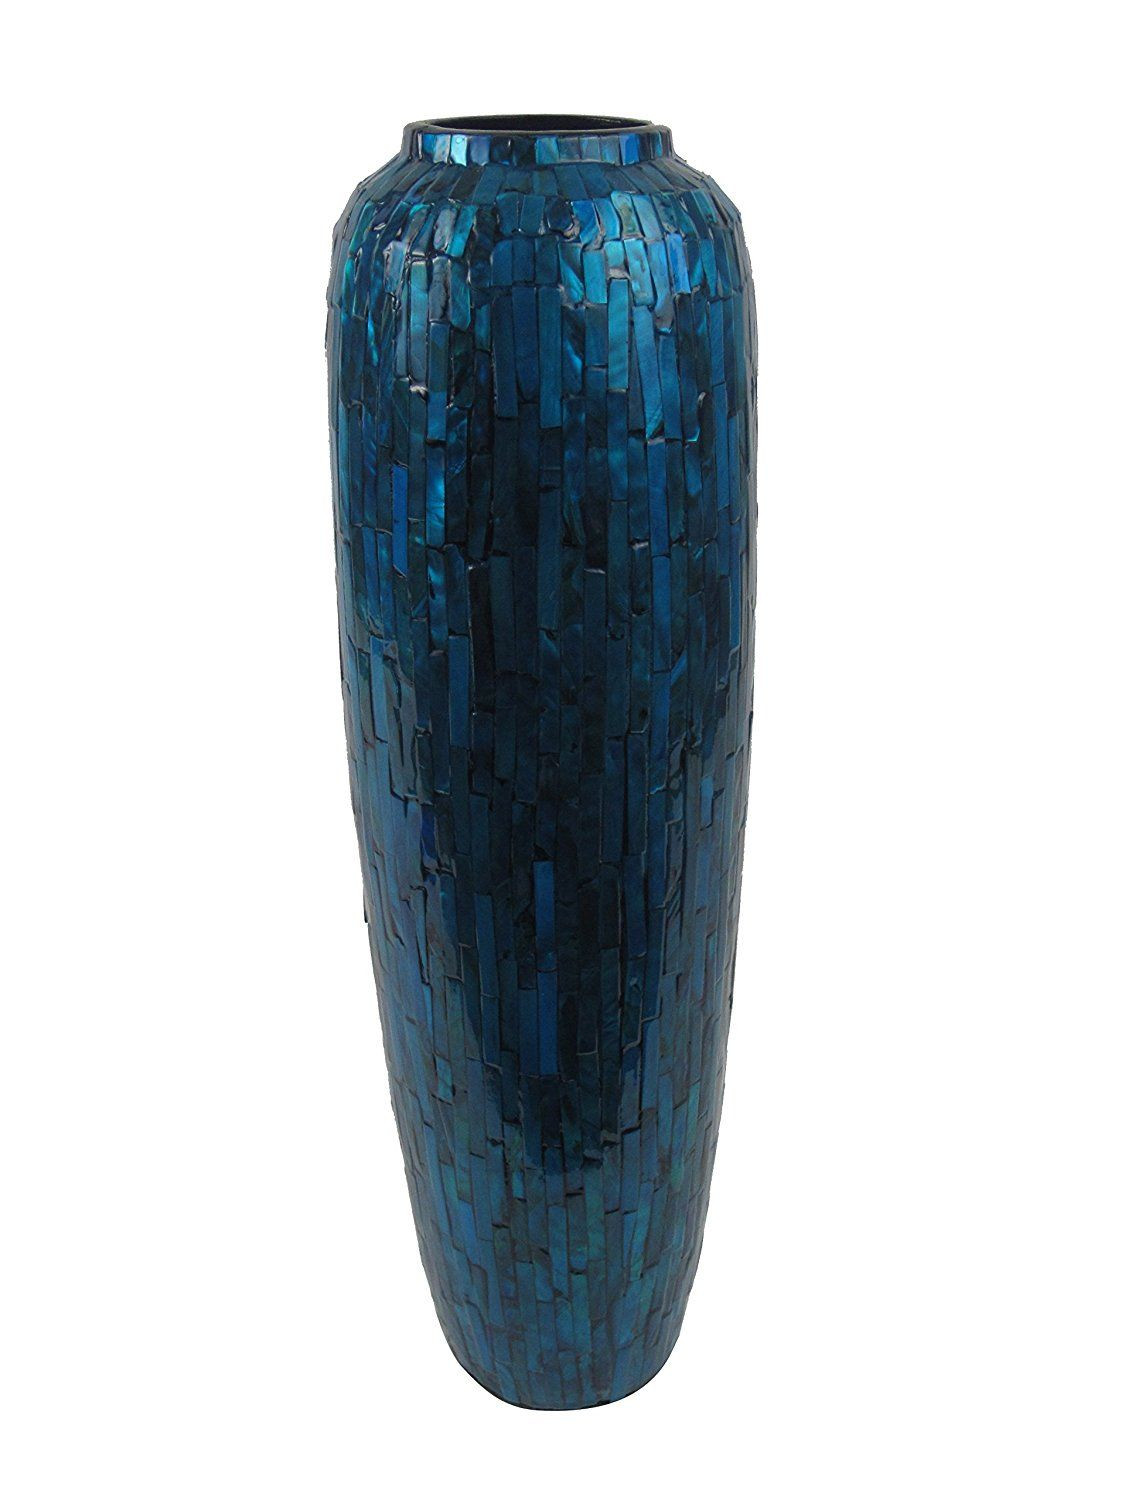 20 Nice Tuscan Vases Home Decor 2024 free download tuscan vases home decor of firefly home collection mother of pearl ceramic vase 4 75 x 16 5 throughout firefly home collection mother of pearl ceramic vase 4 75 x 16 5 turquoise